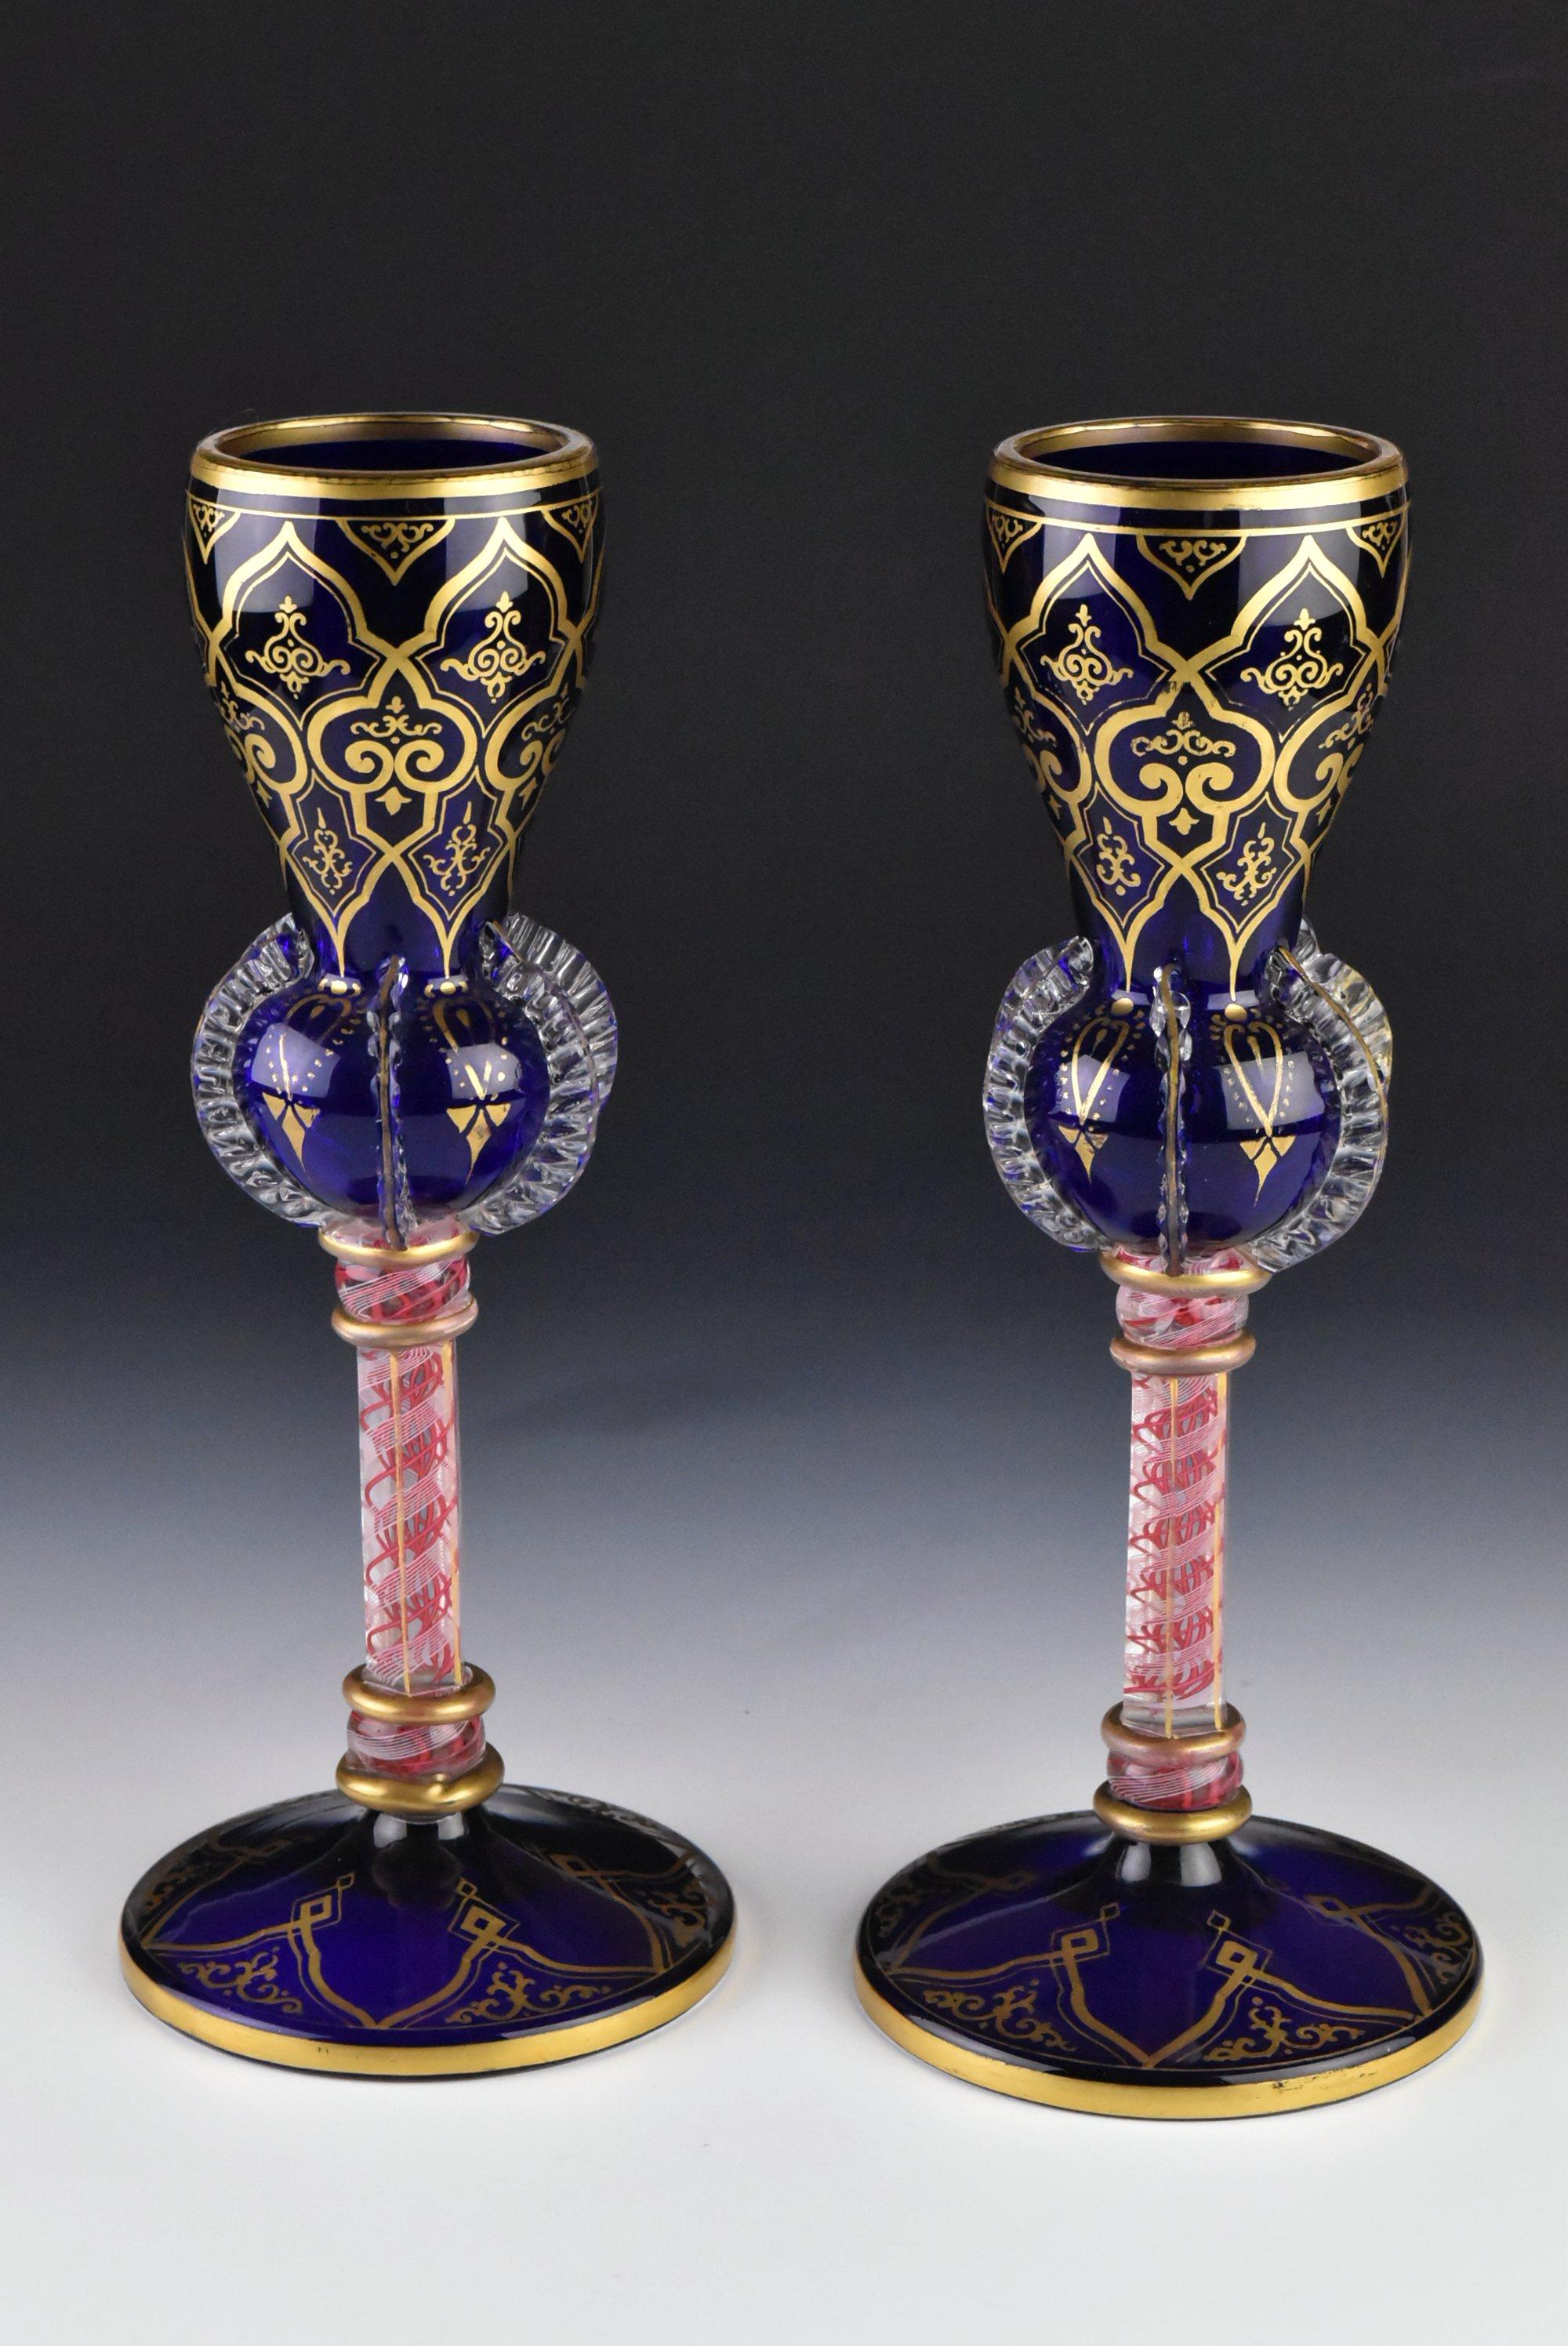 Description: Pair antique blown stem goblets with cobalt blue tops and clear over blue bases. They have applied riggory with facet cut clear glass stems decorated with pink ribbon threading twisting inside white swirl. They are highlighted with gold